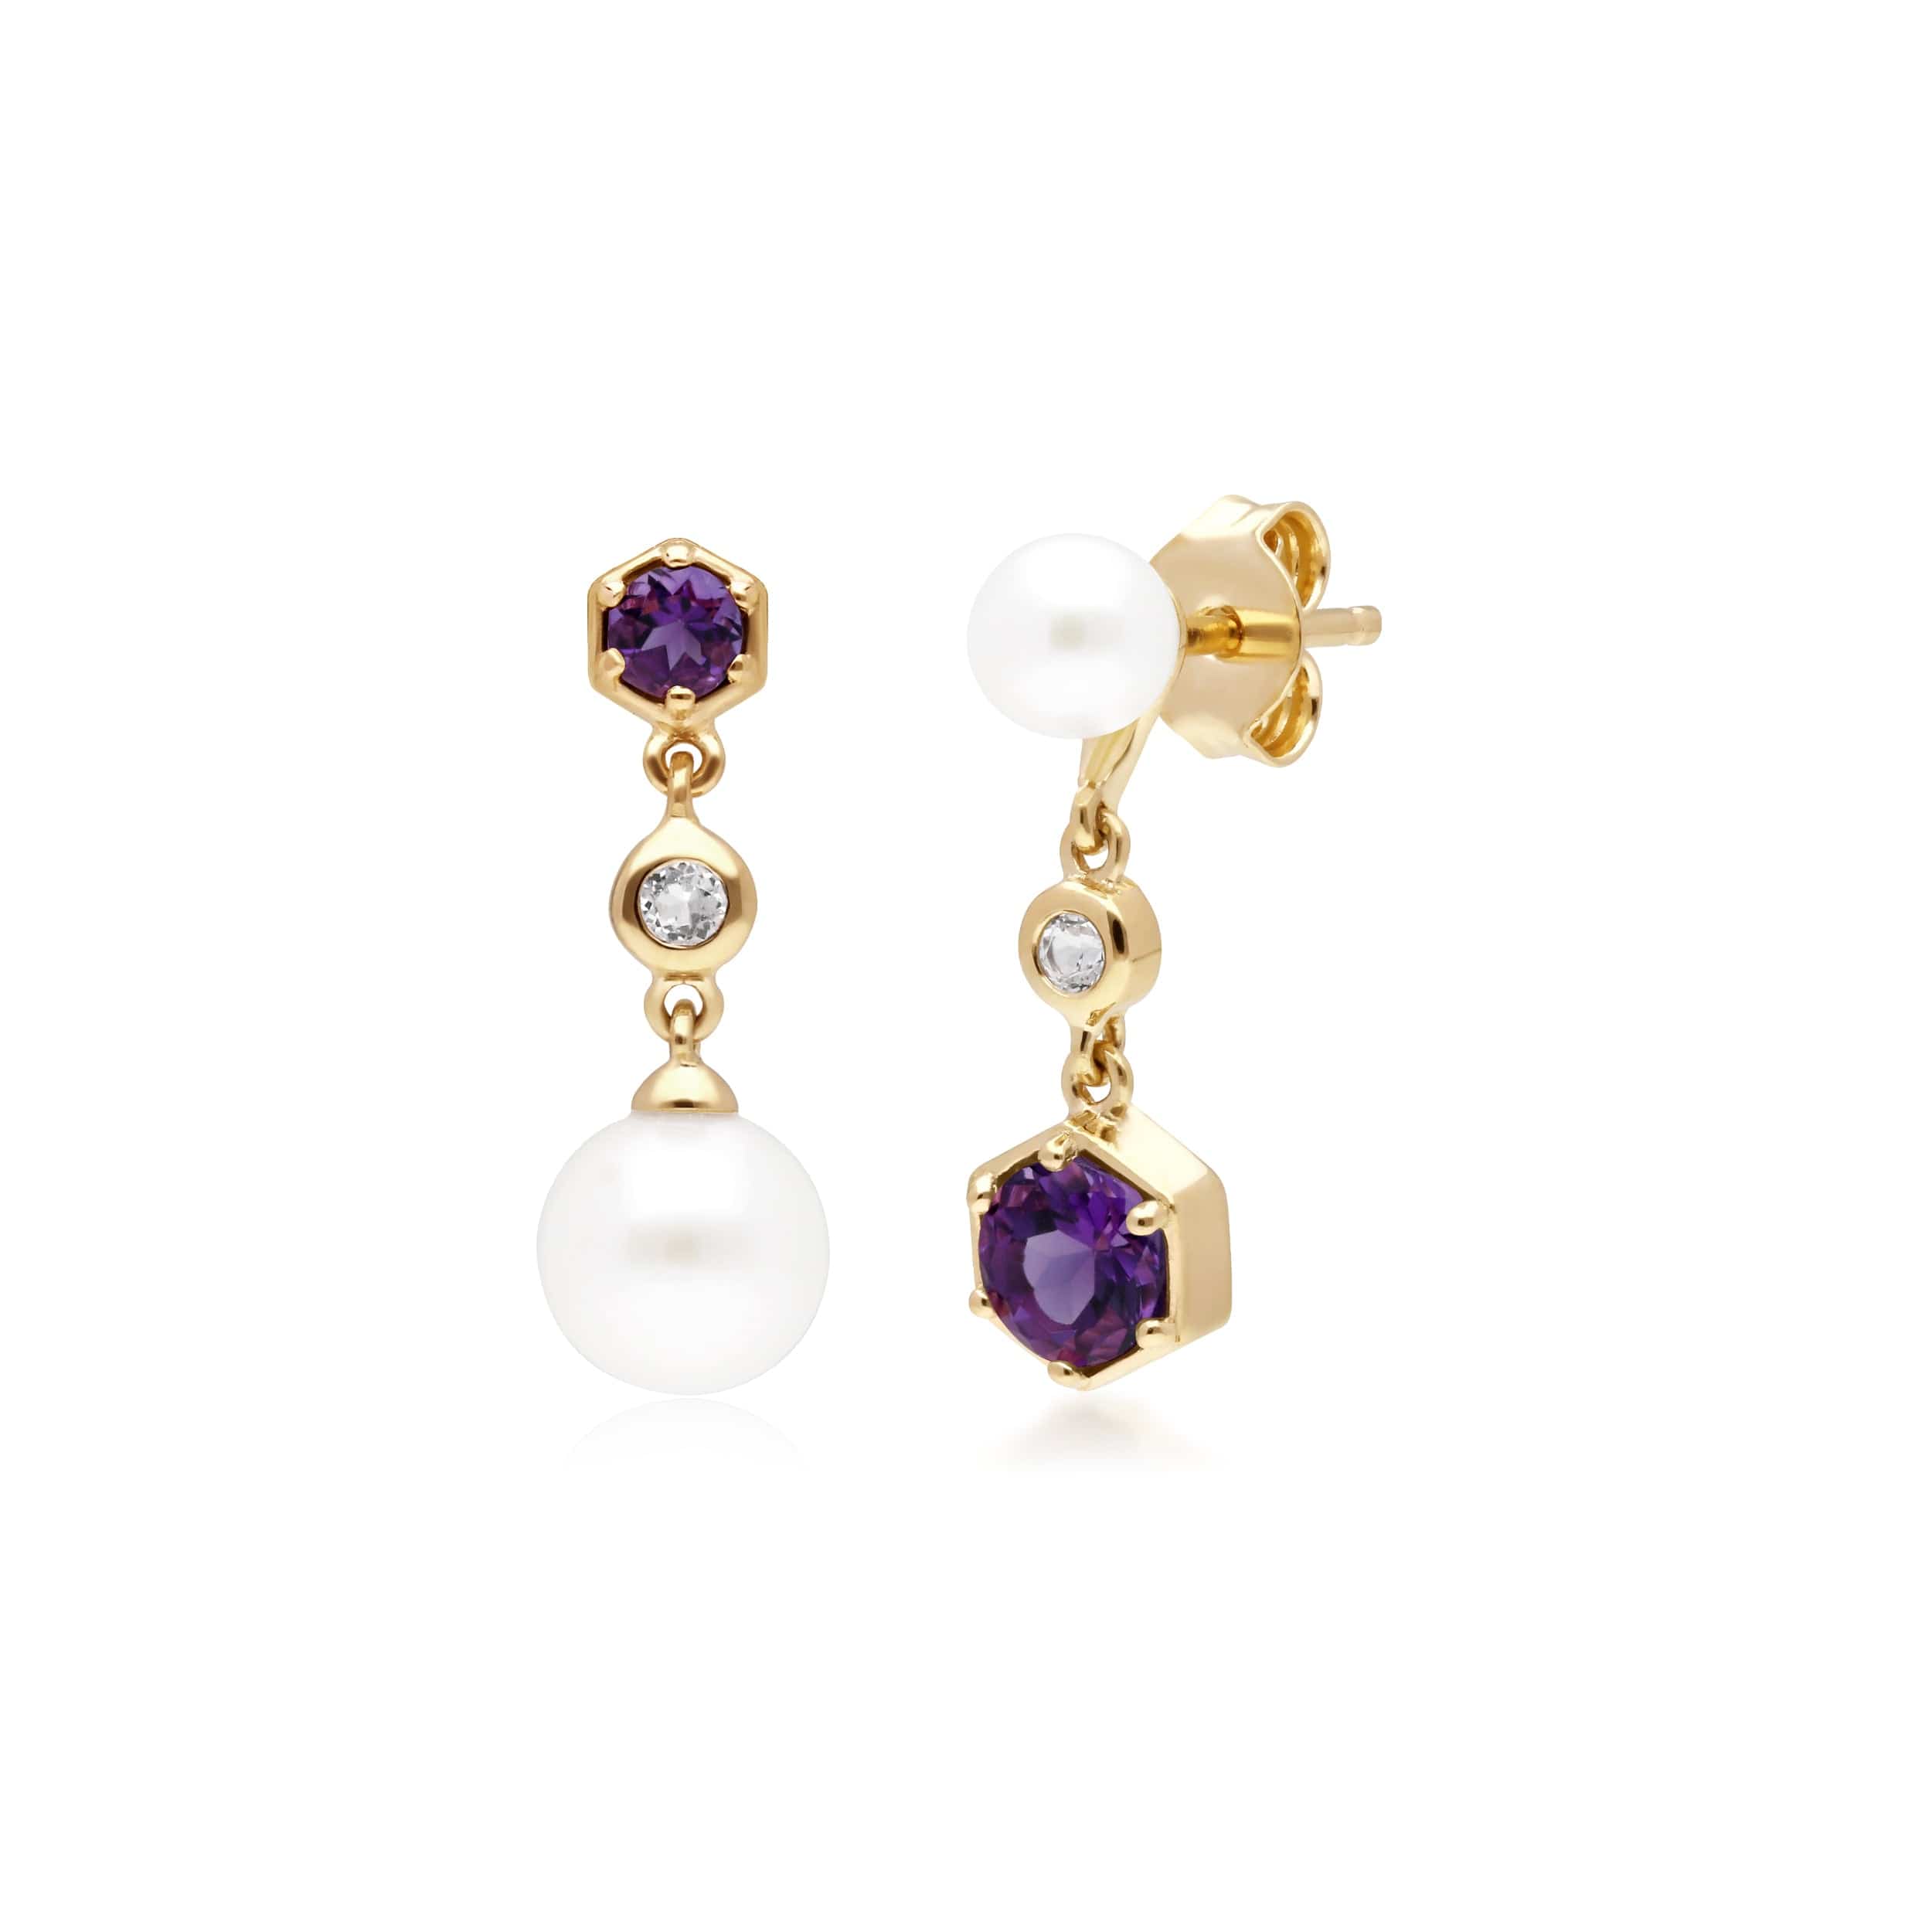 270E030104925 Modern Pearl, Amethyst & Topaz Mismatched Drop Earrings in Gold Plated Silver 1